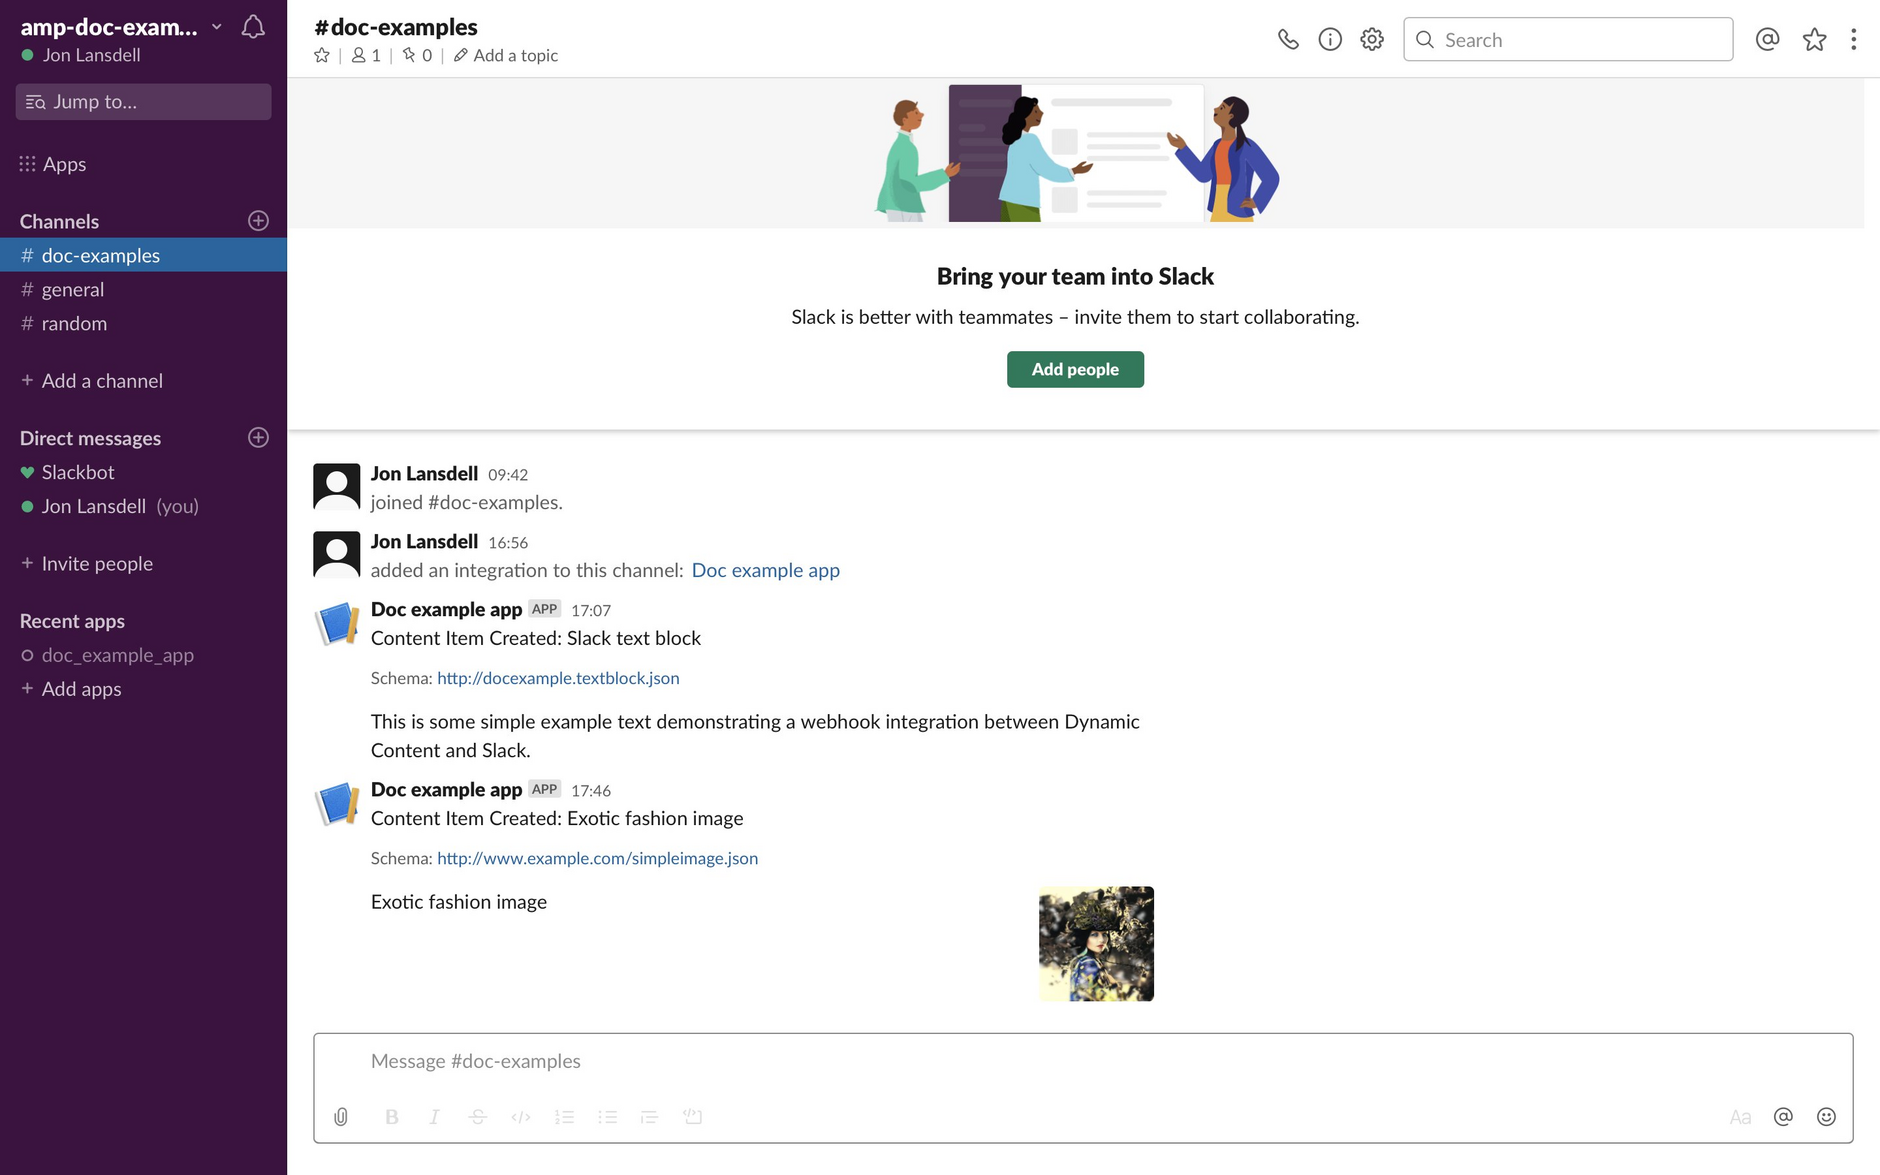 The image is shown in a new Slack message